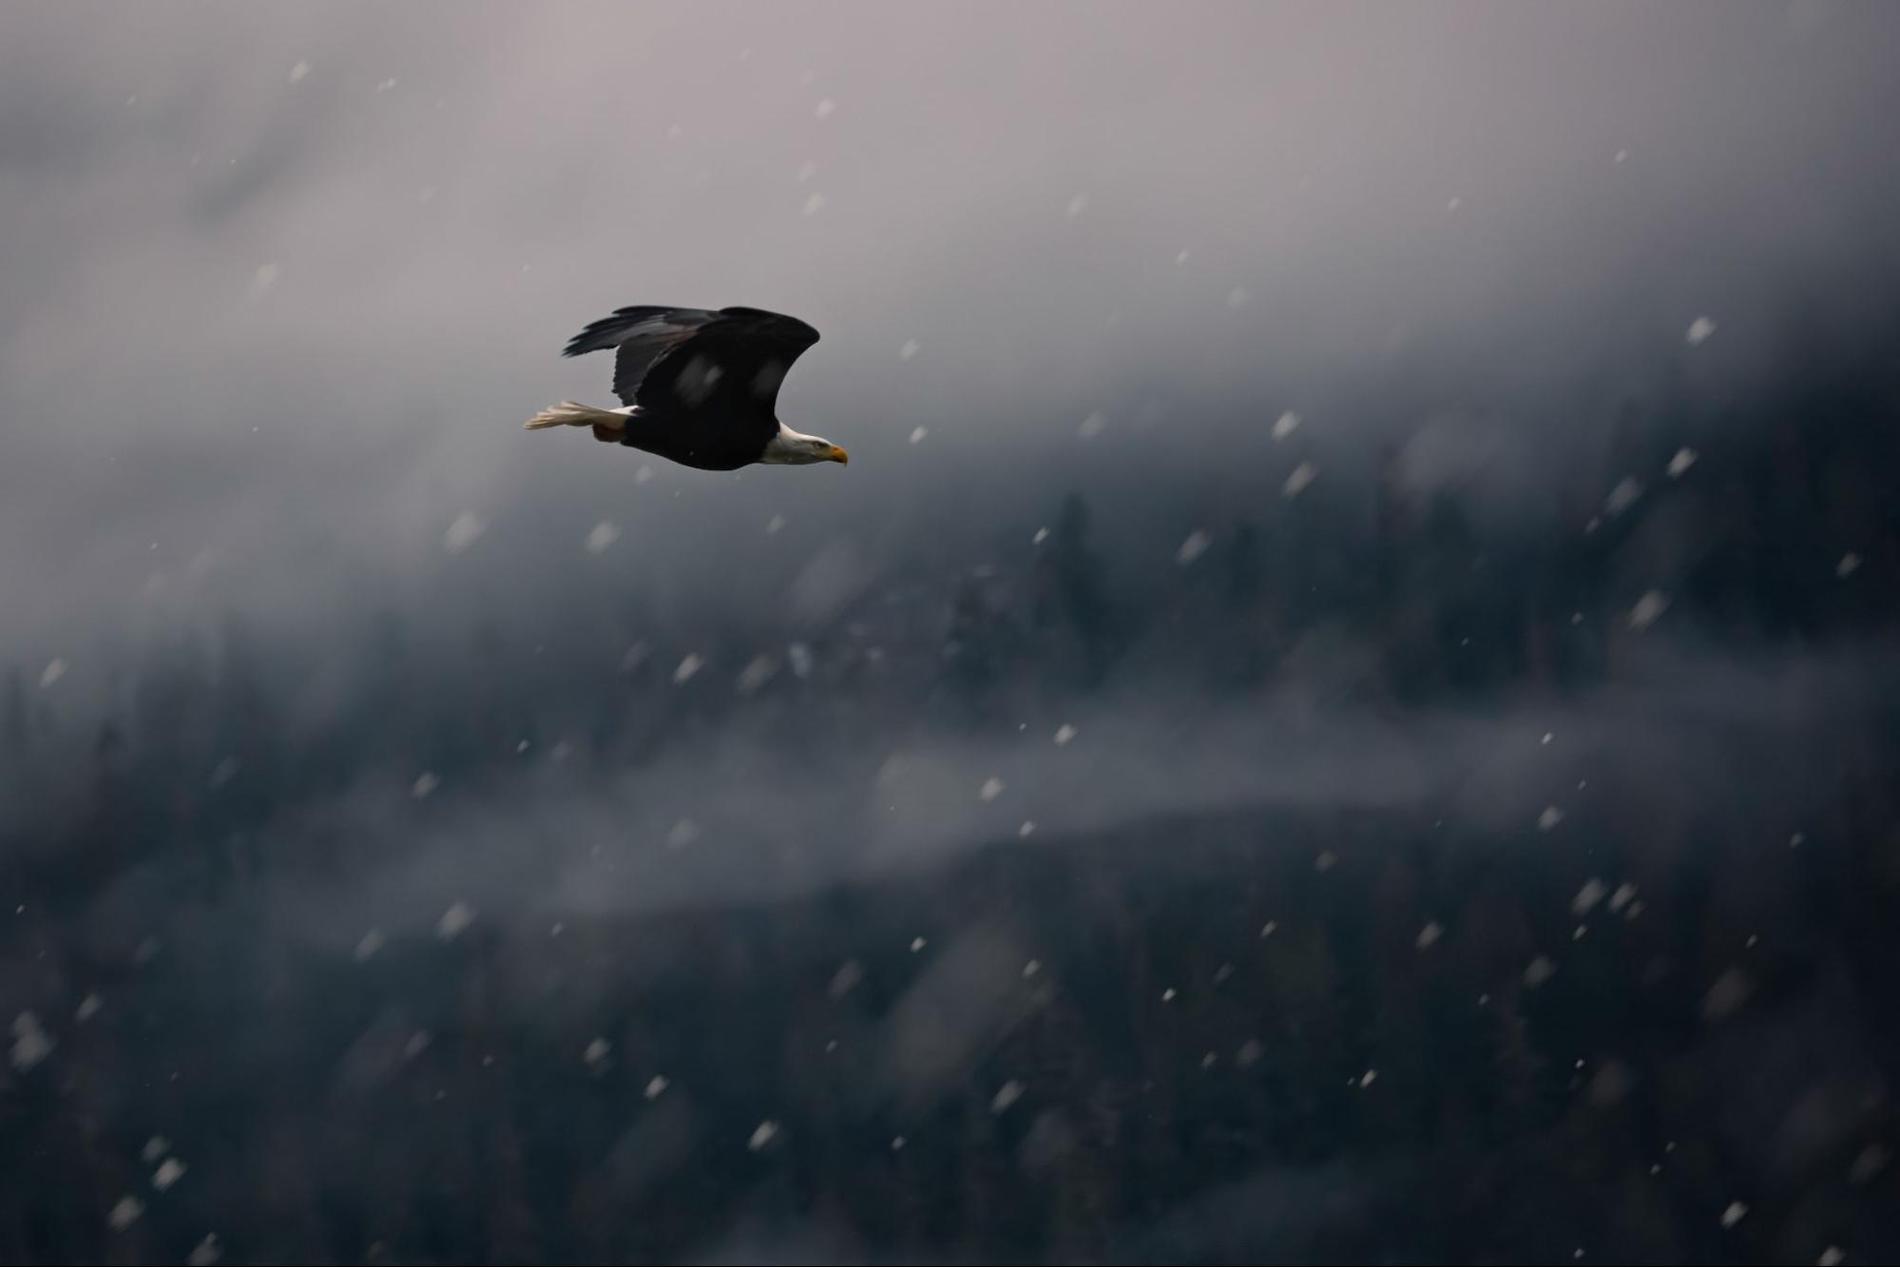 The secret's out. Whistler's a hot destination for bird watching.